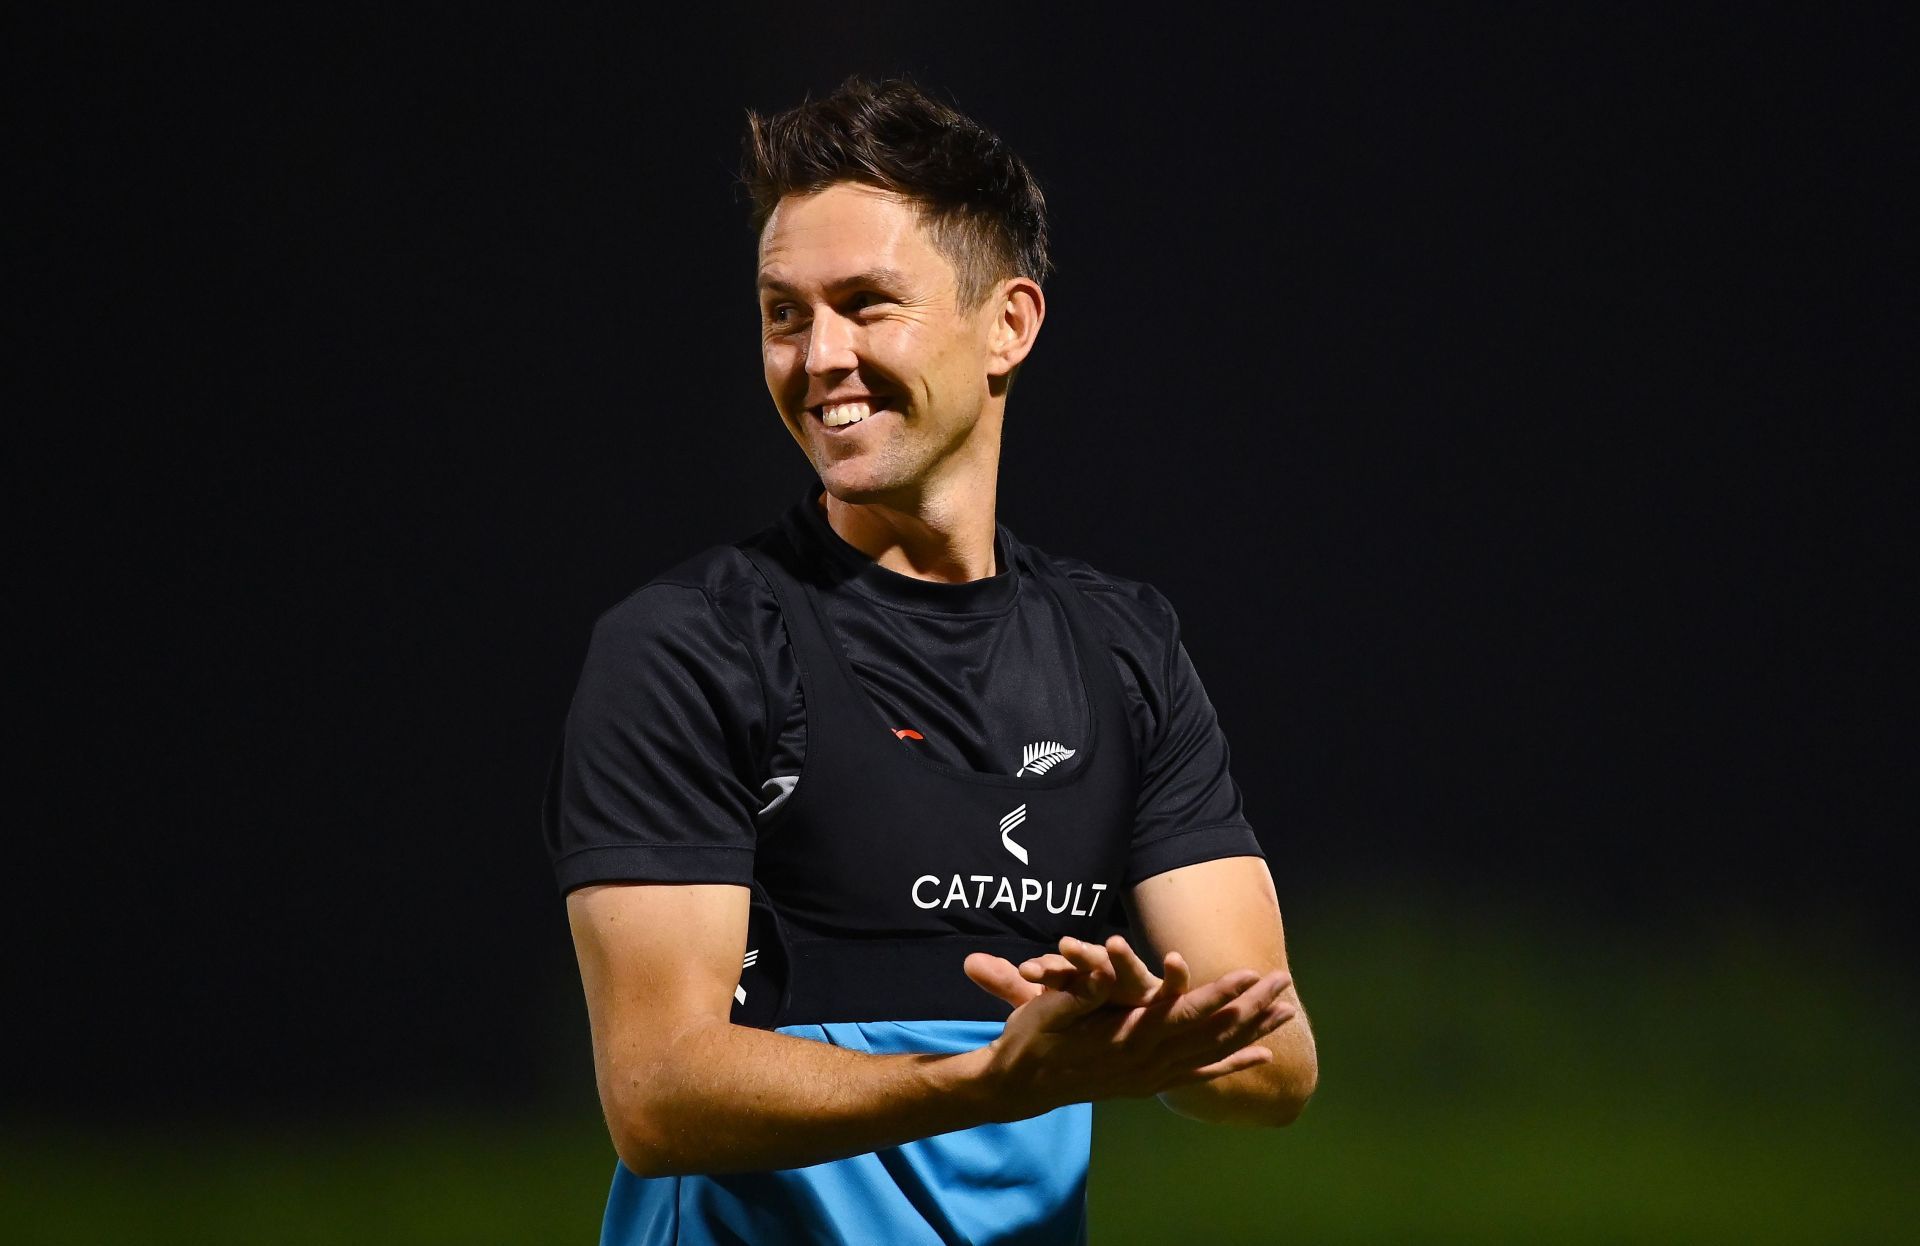 Trent Boult was snapped up by Rajasthan Royals in the IPL 2022 auction.